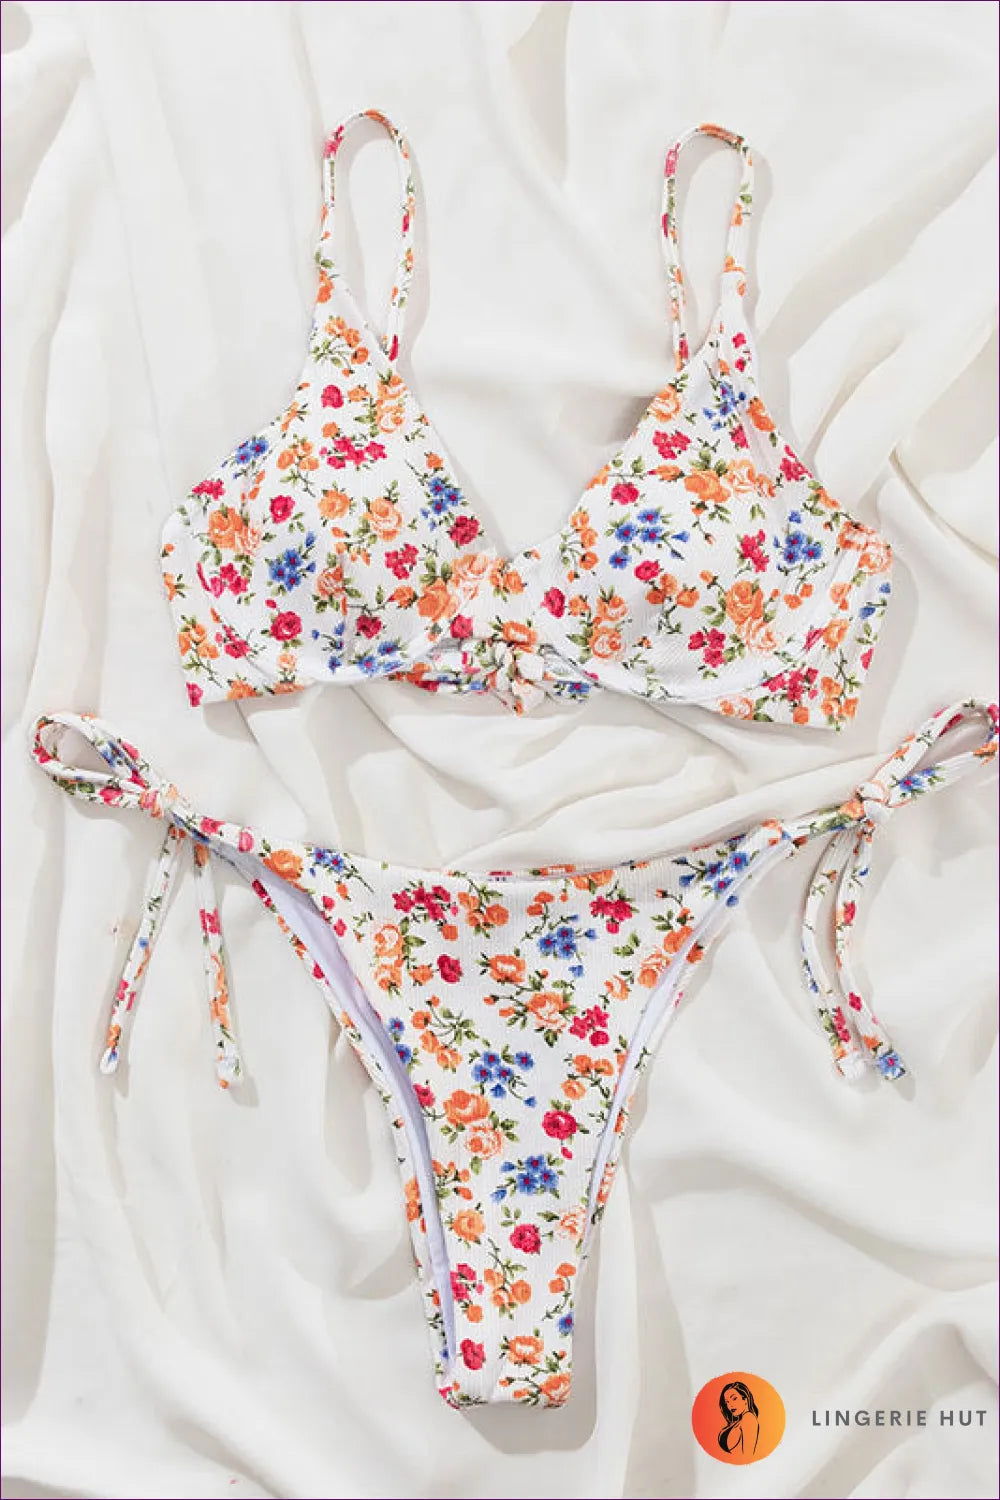 Get Ready To Embrace Your Beach Bohemian Spirit With Our Boho Floral Lace Print Bikini Swimsuit! Complete